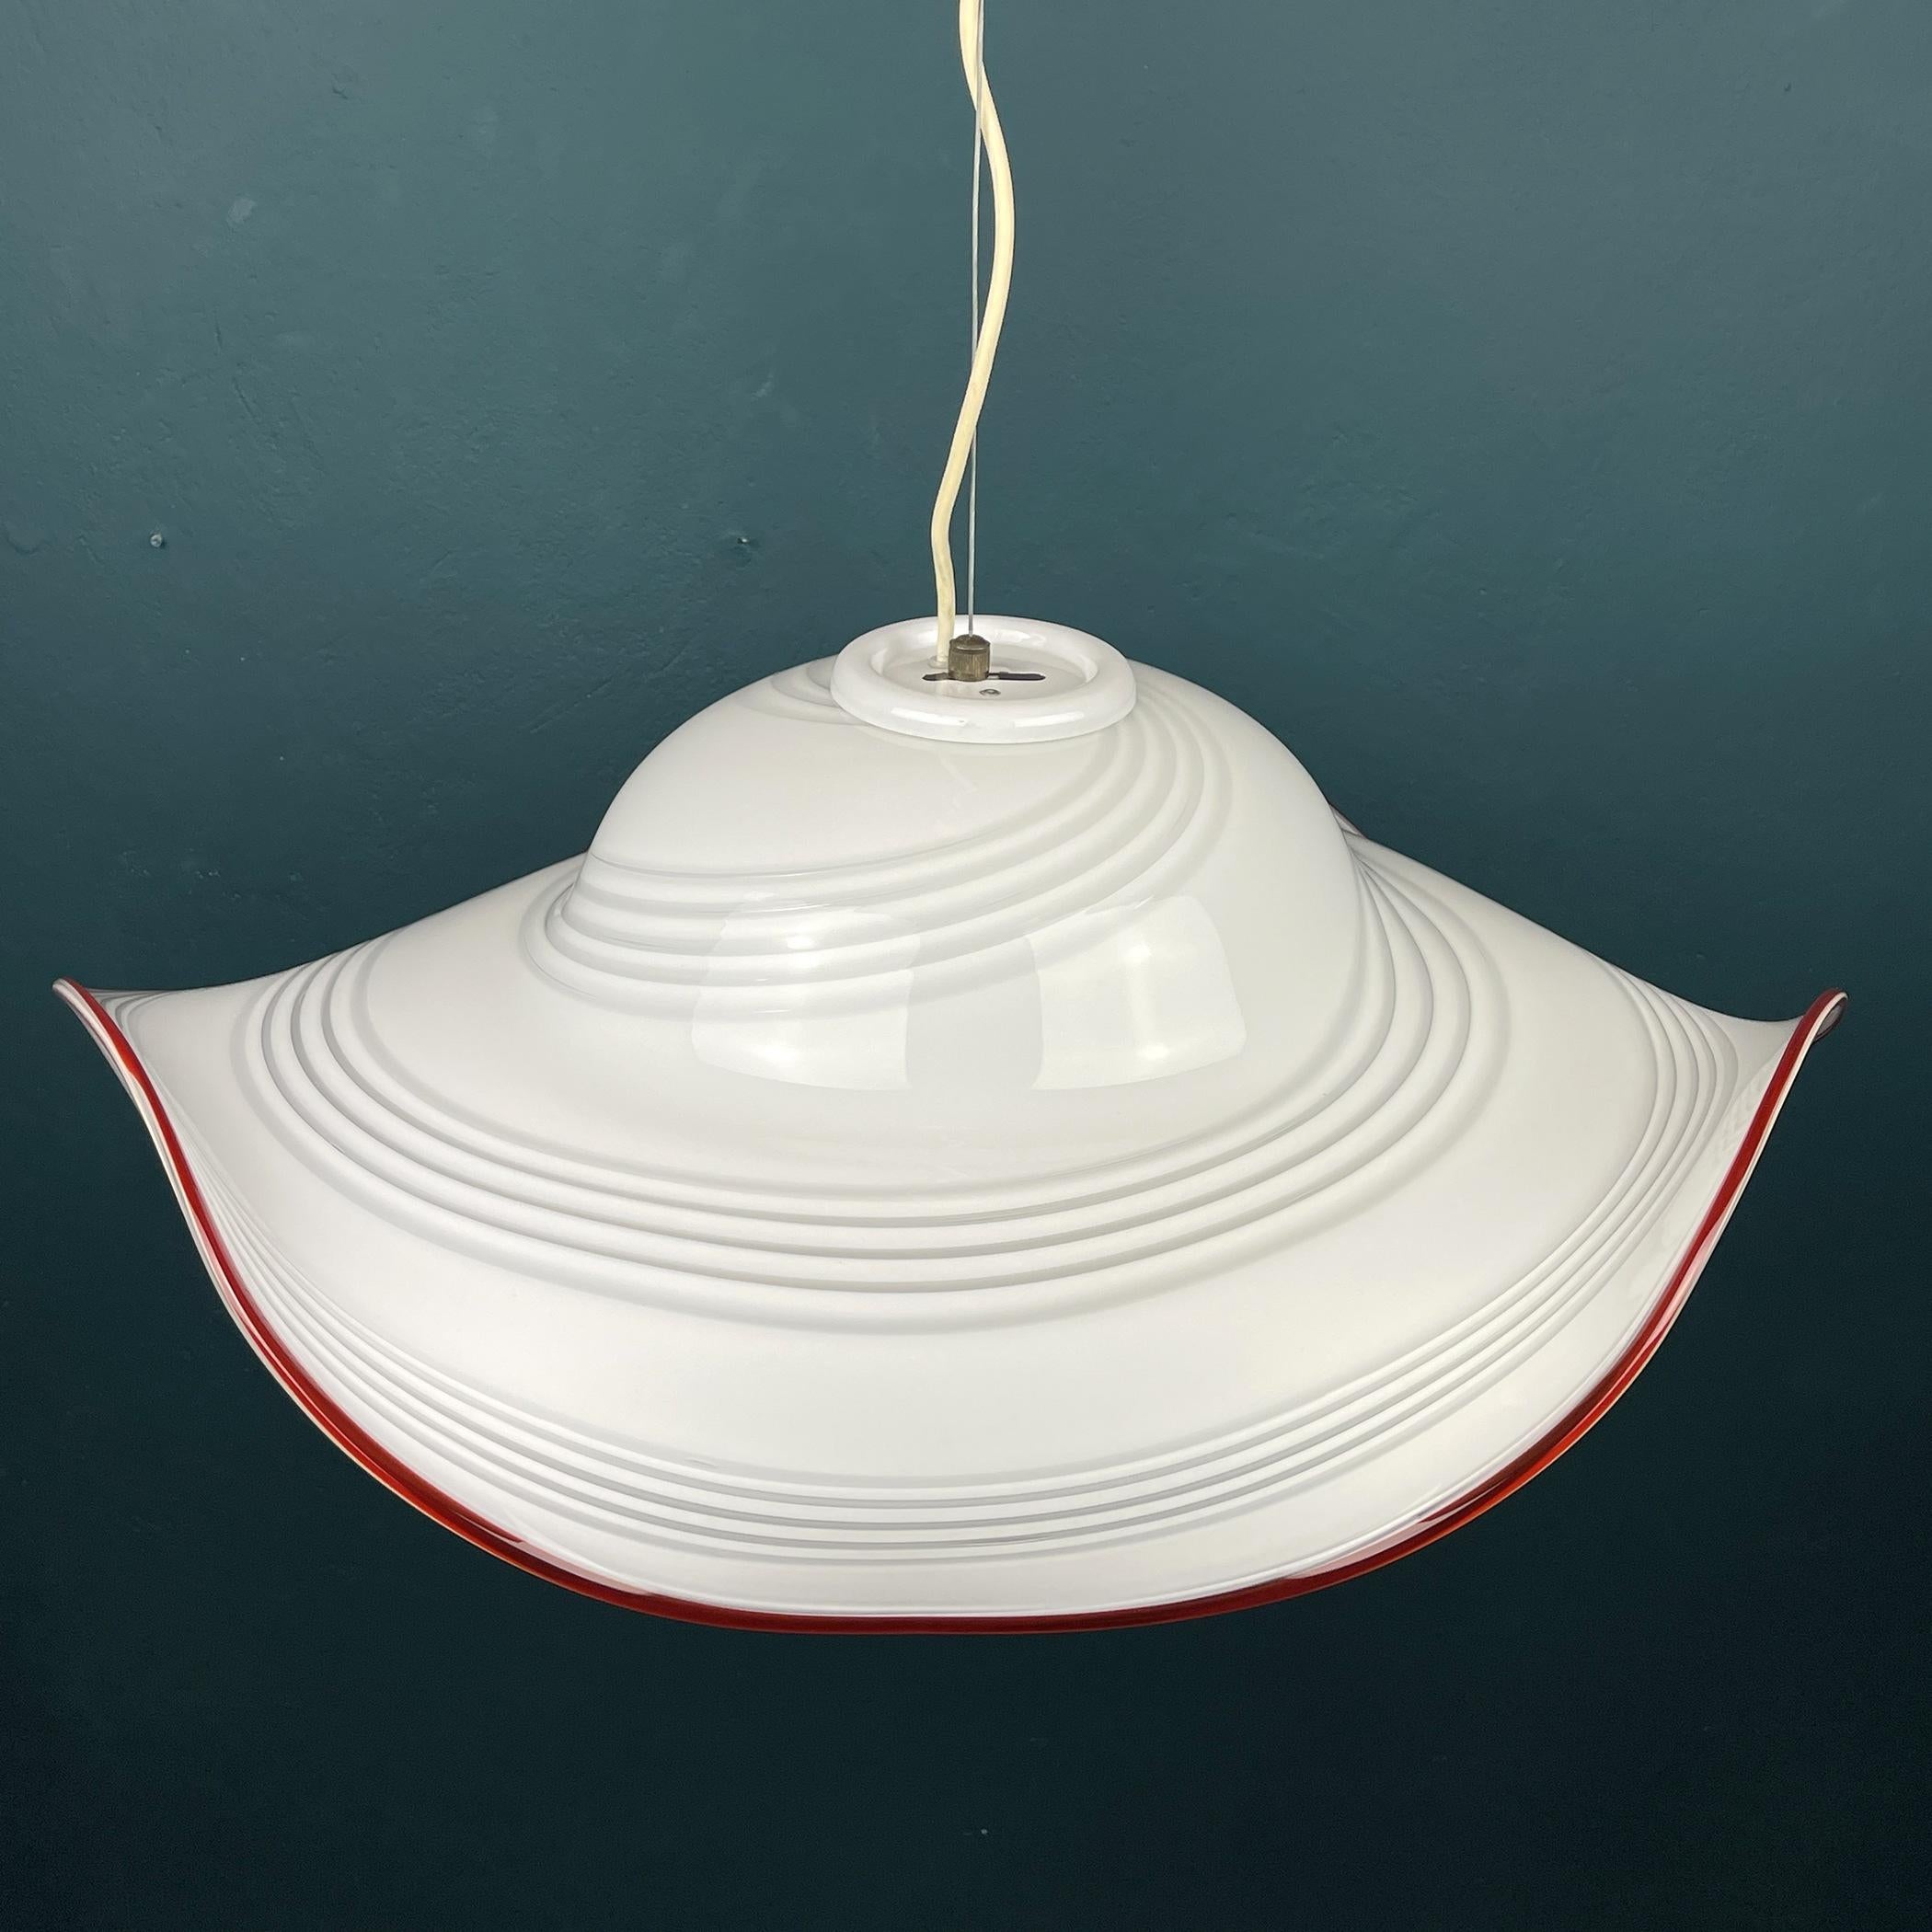 Vintage Swirl White Red Murano Glass Pendant Lamp, Italy, 1970s For Sale 5